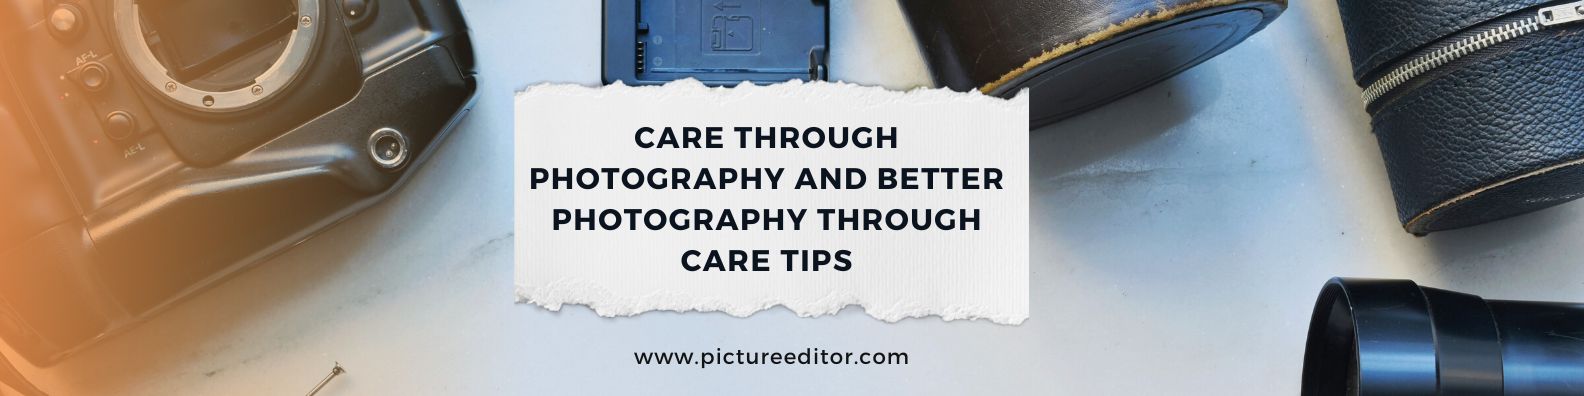 Care through photography and better photography through care tips